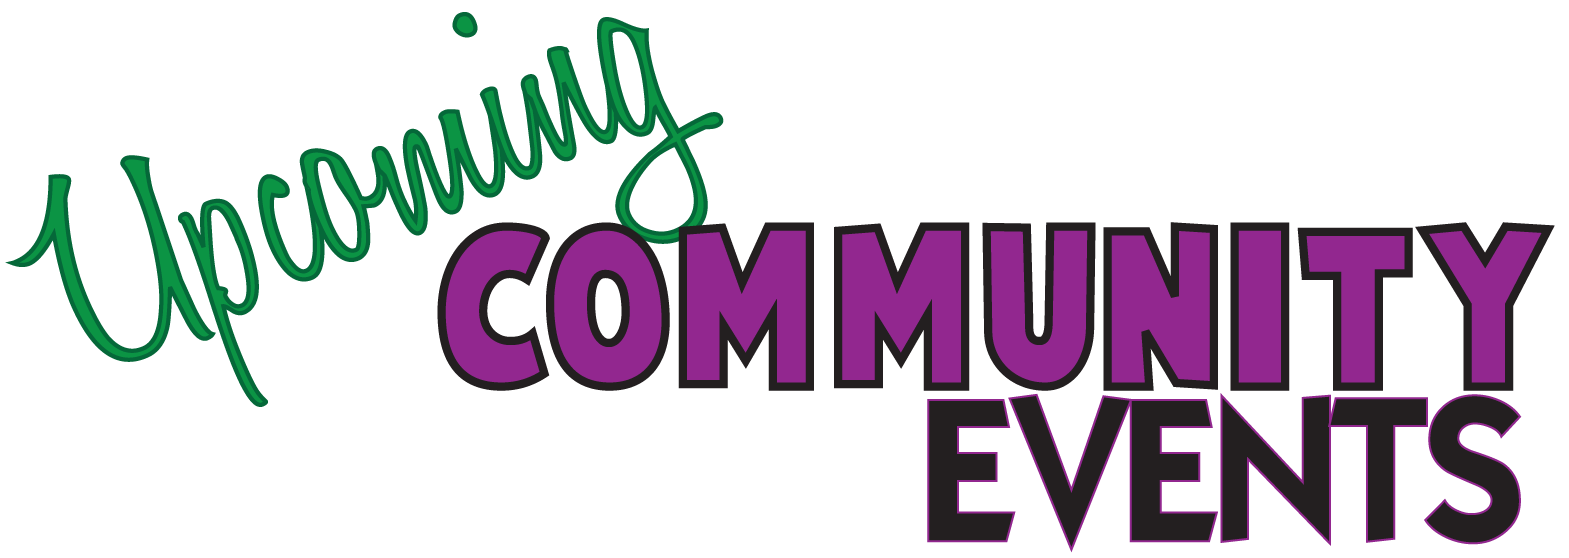 Community Calendar  Check Out Some Upcoming Local Events   The Light    